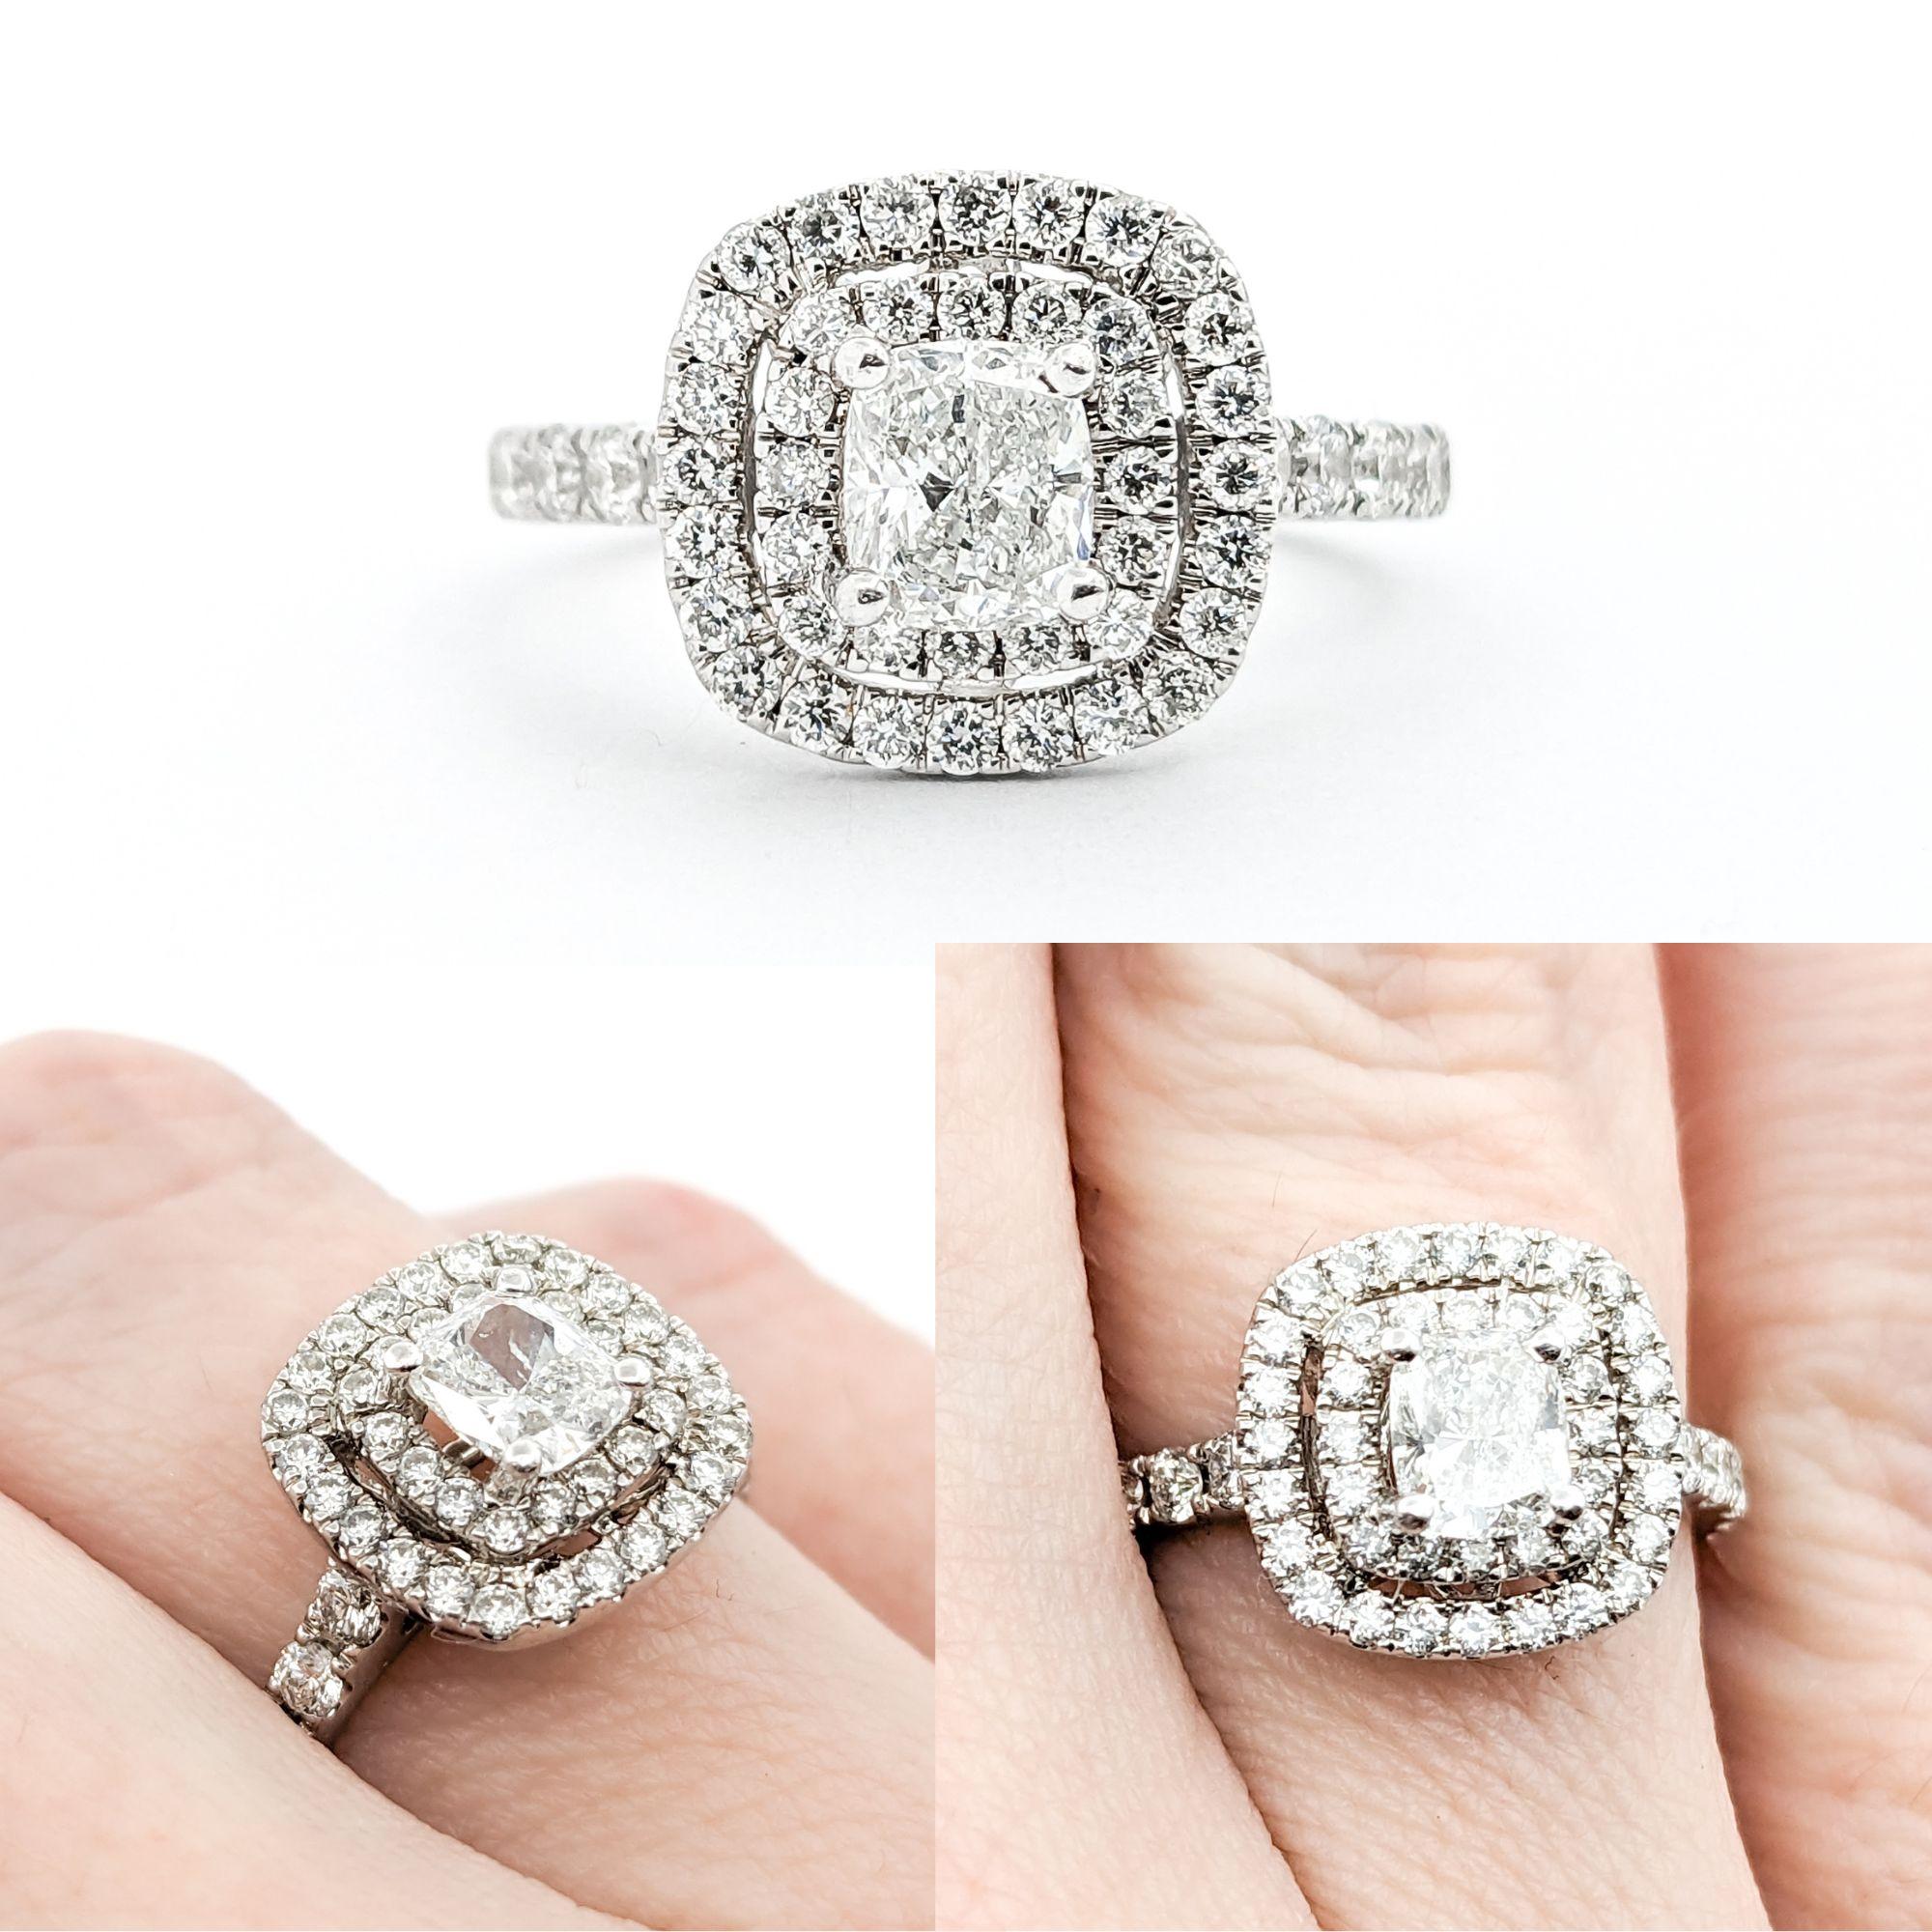 Double Halo 1.09ctw Diamond Engagment Ring In White Gold

This stunning Diamond Engagement Ring, meticulously crafted in 14kt White Gold, is a symbol of timeless elegance and love. It features a dazzling array of diamonds with a total weight of